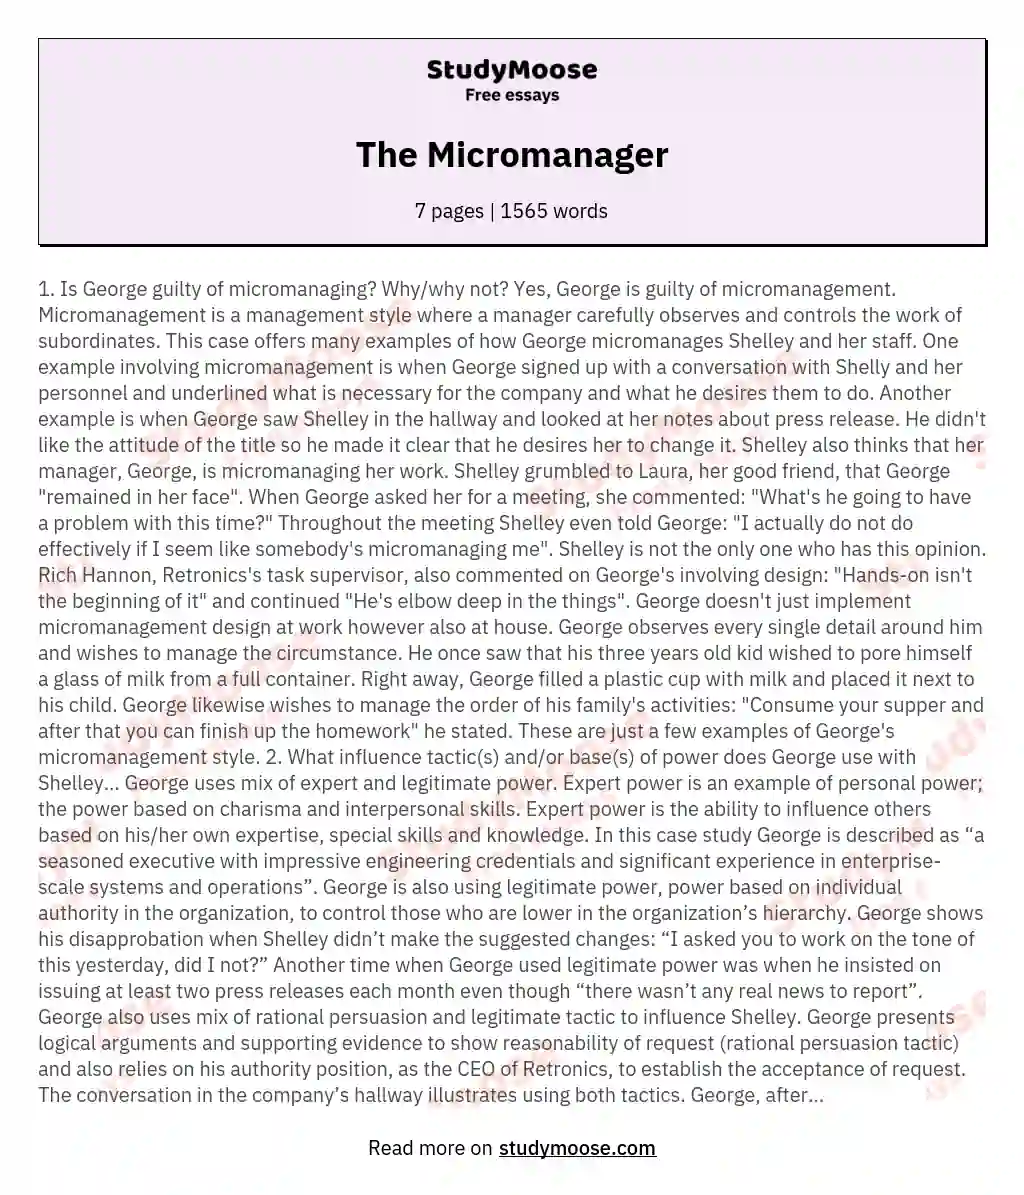 The Micromanager essay